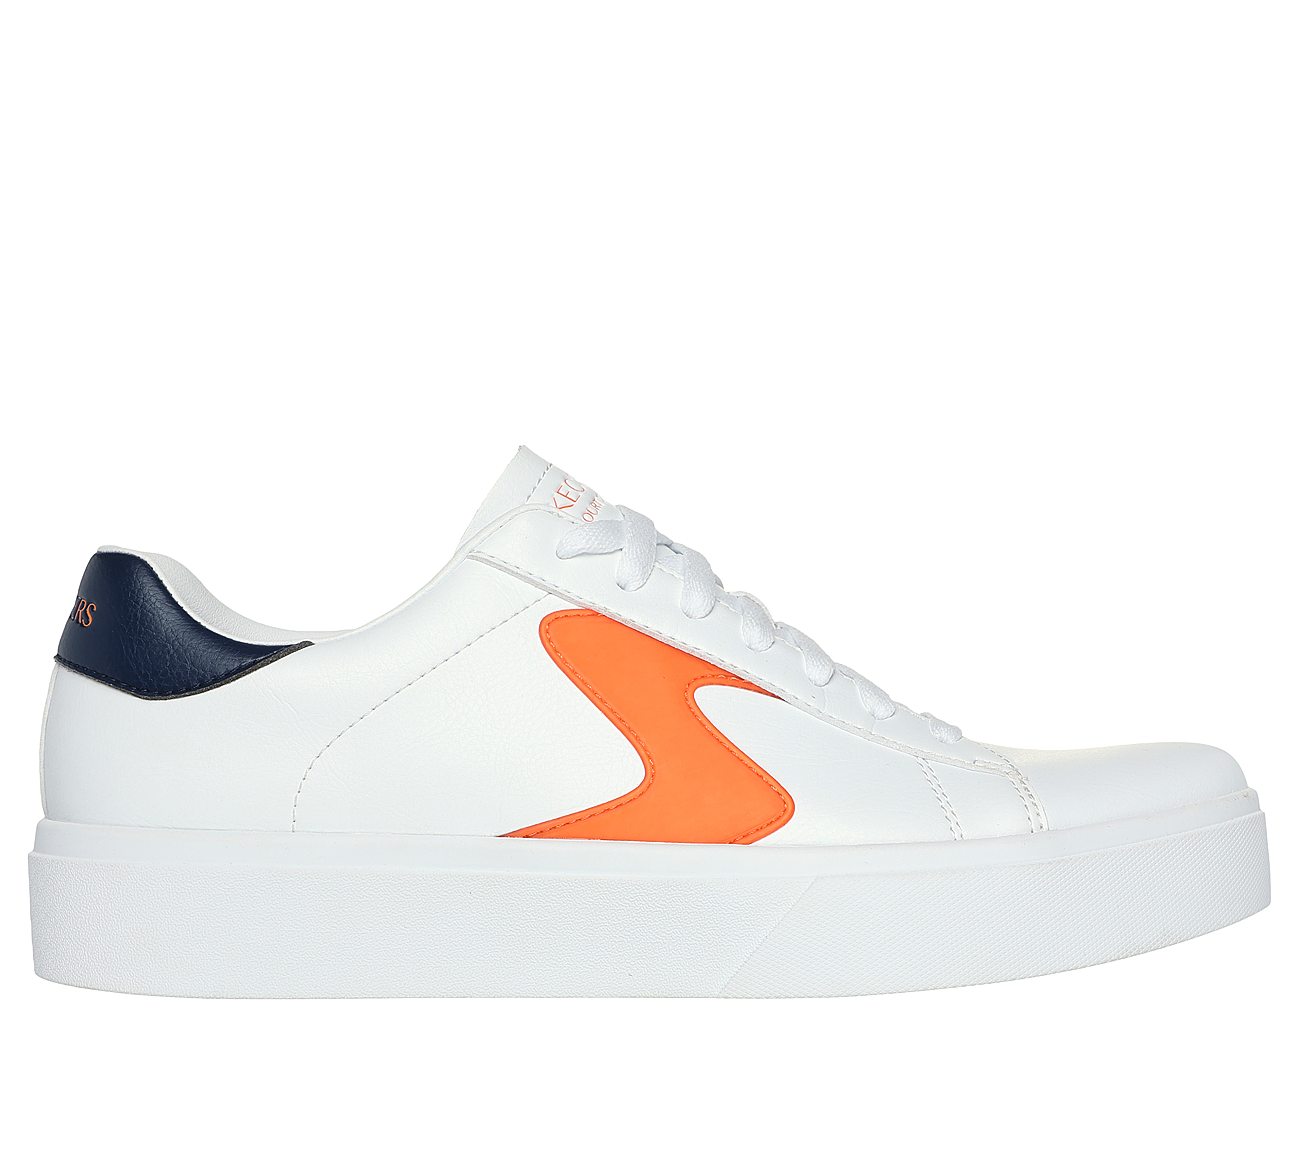 EDEN LX - REMEMBRANCE, WHITE ORANGE Footwear Lateral View